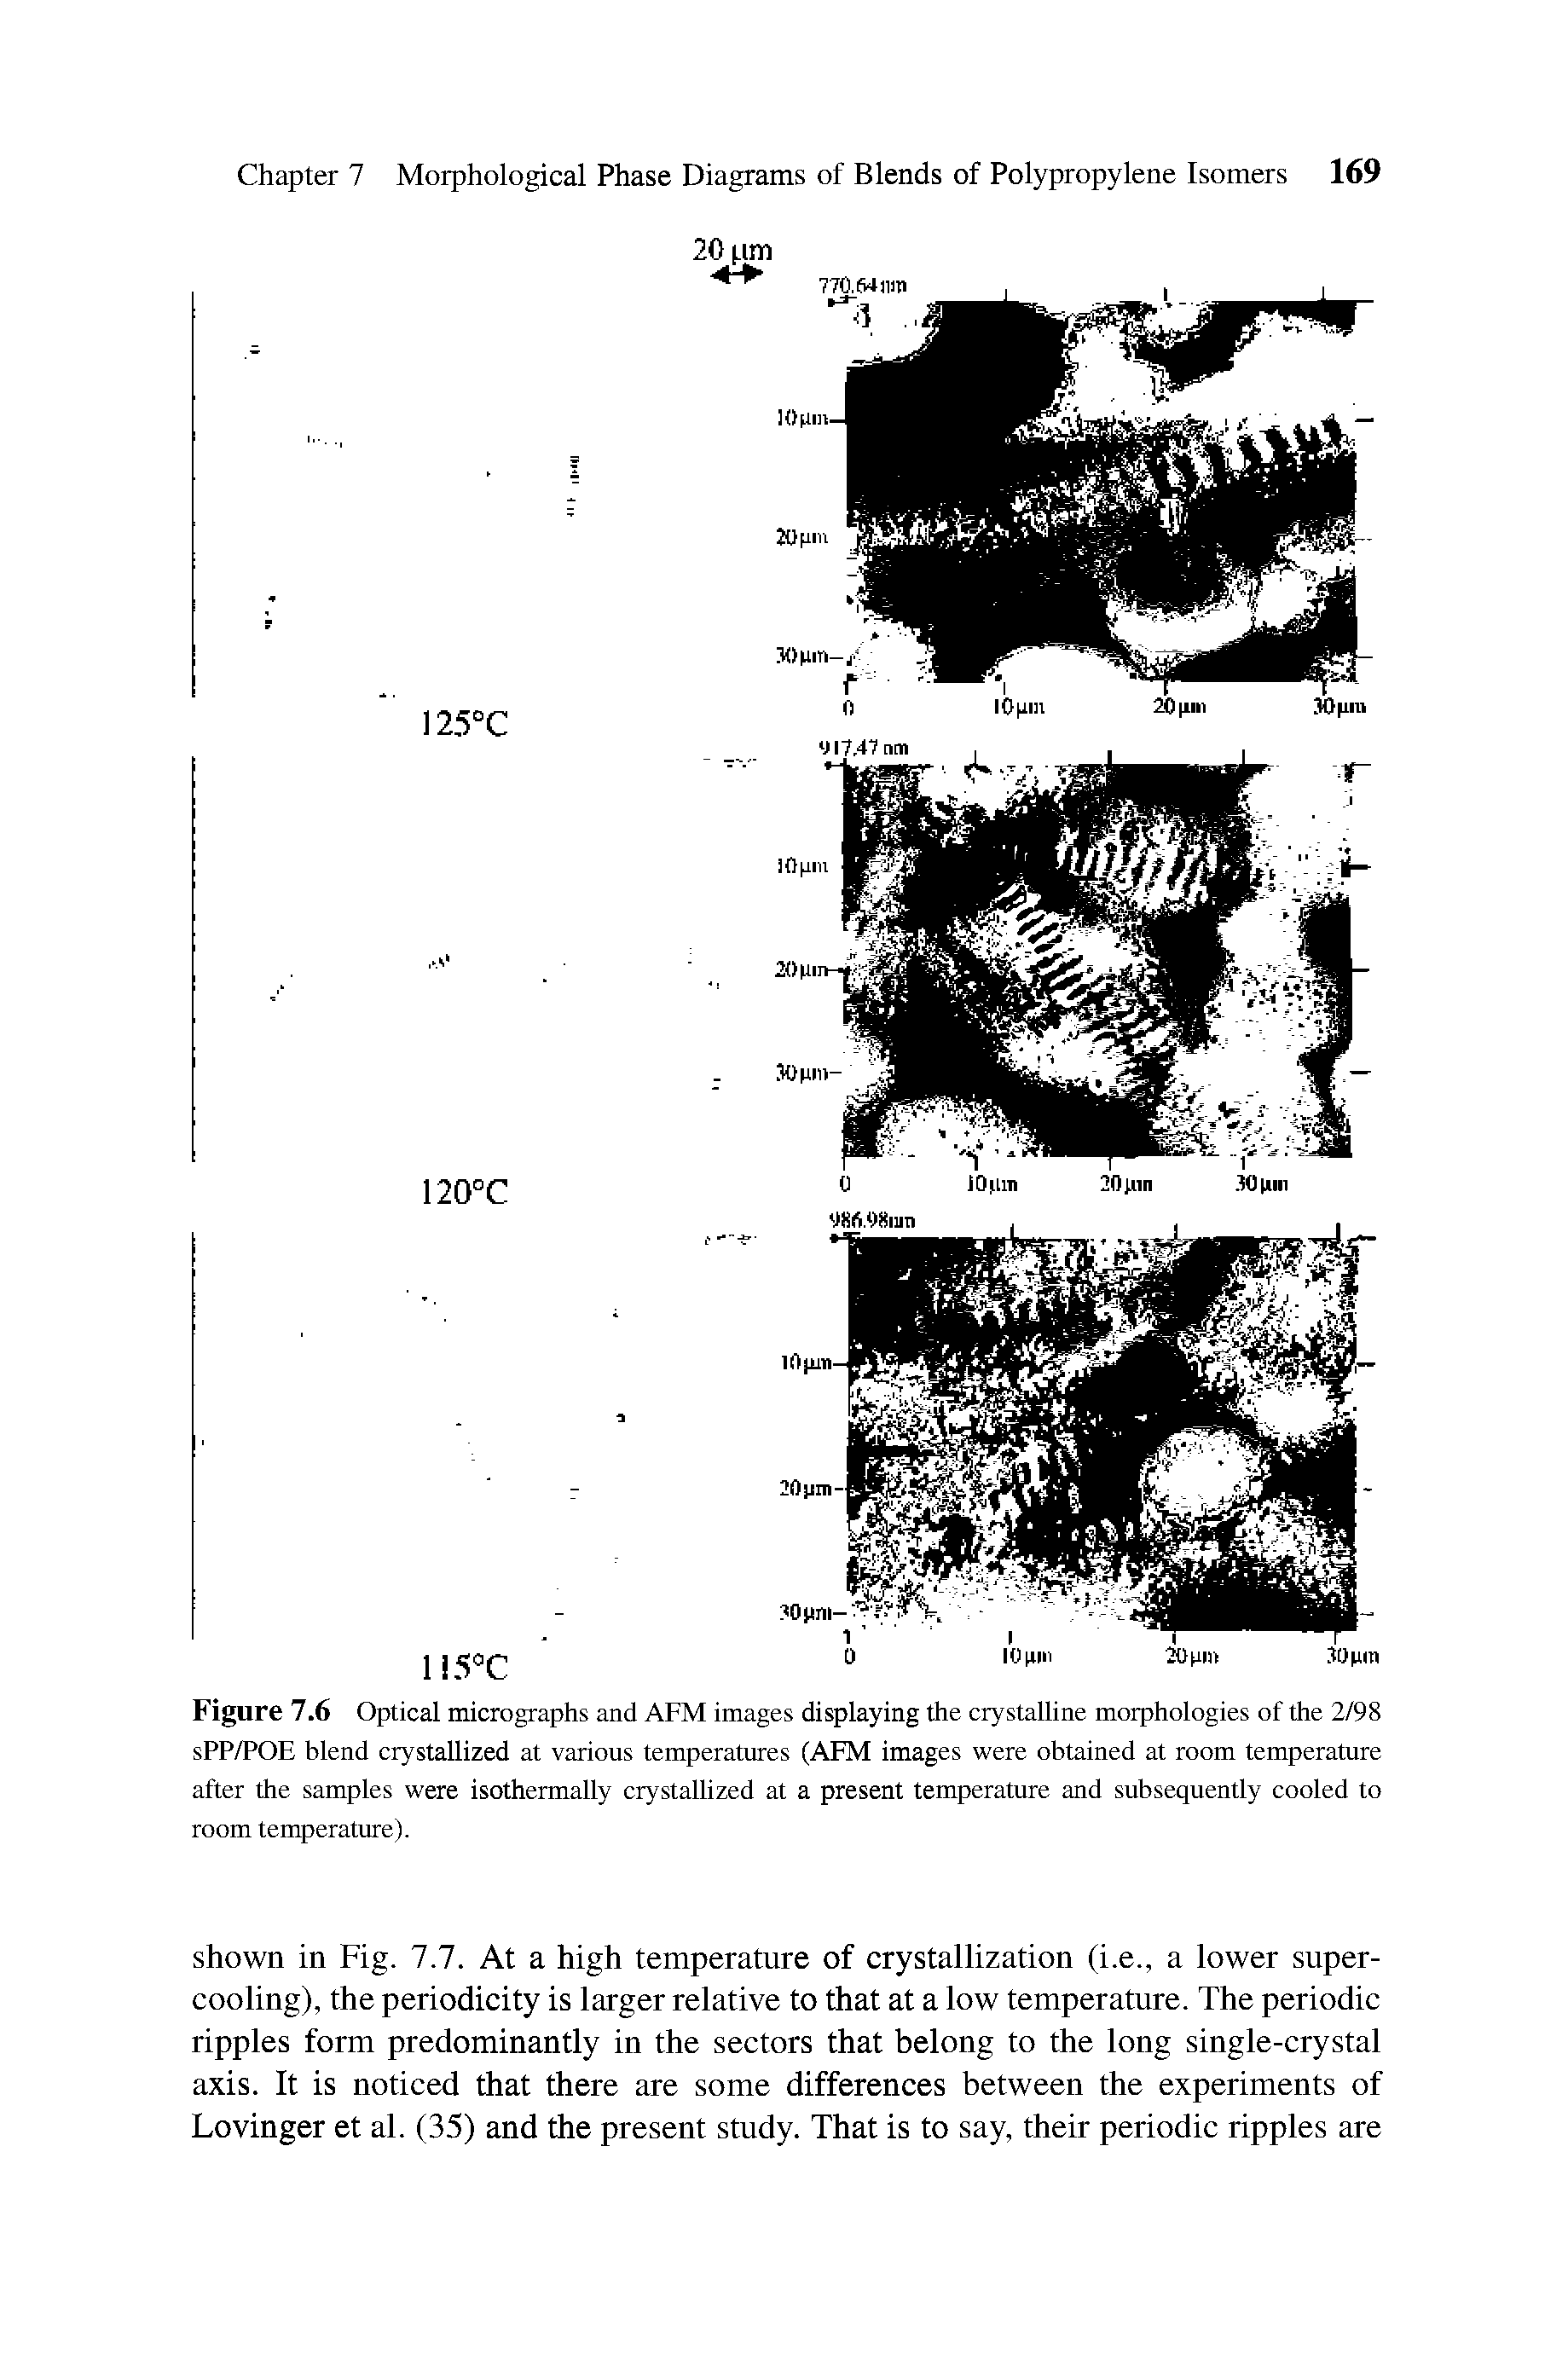 Figure 7.6 Optical micrographs and AFM images displaying the crystalline morphologies of the 2/98 sPP/POE blend crystallized at various temperatures (AFM images were obtained at room temperature after the samples were isothermally crystallized at a present temperature and subsequently cooled to room temperature).